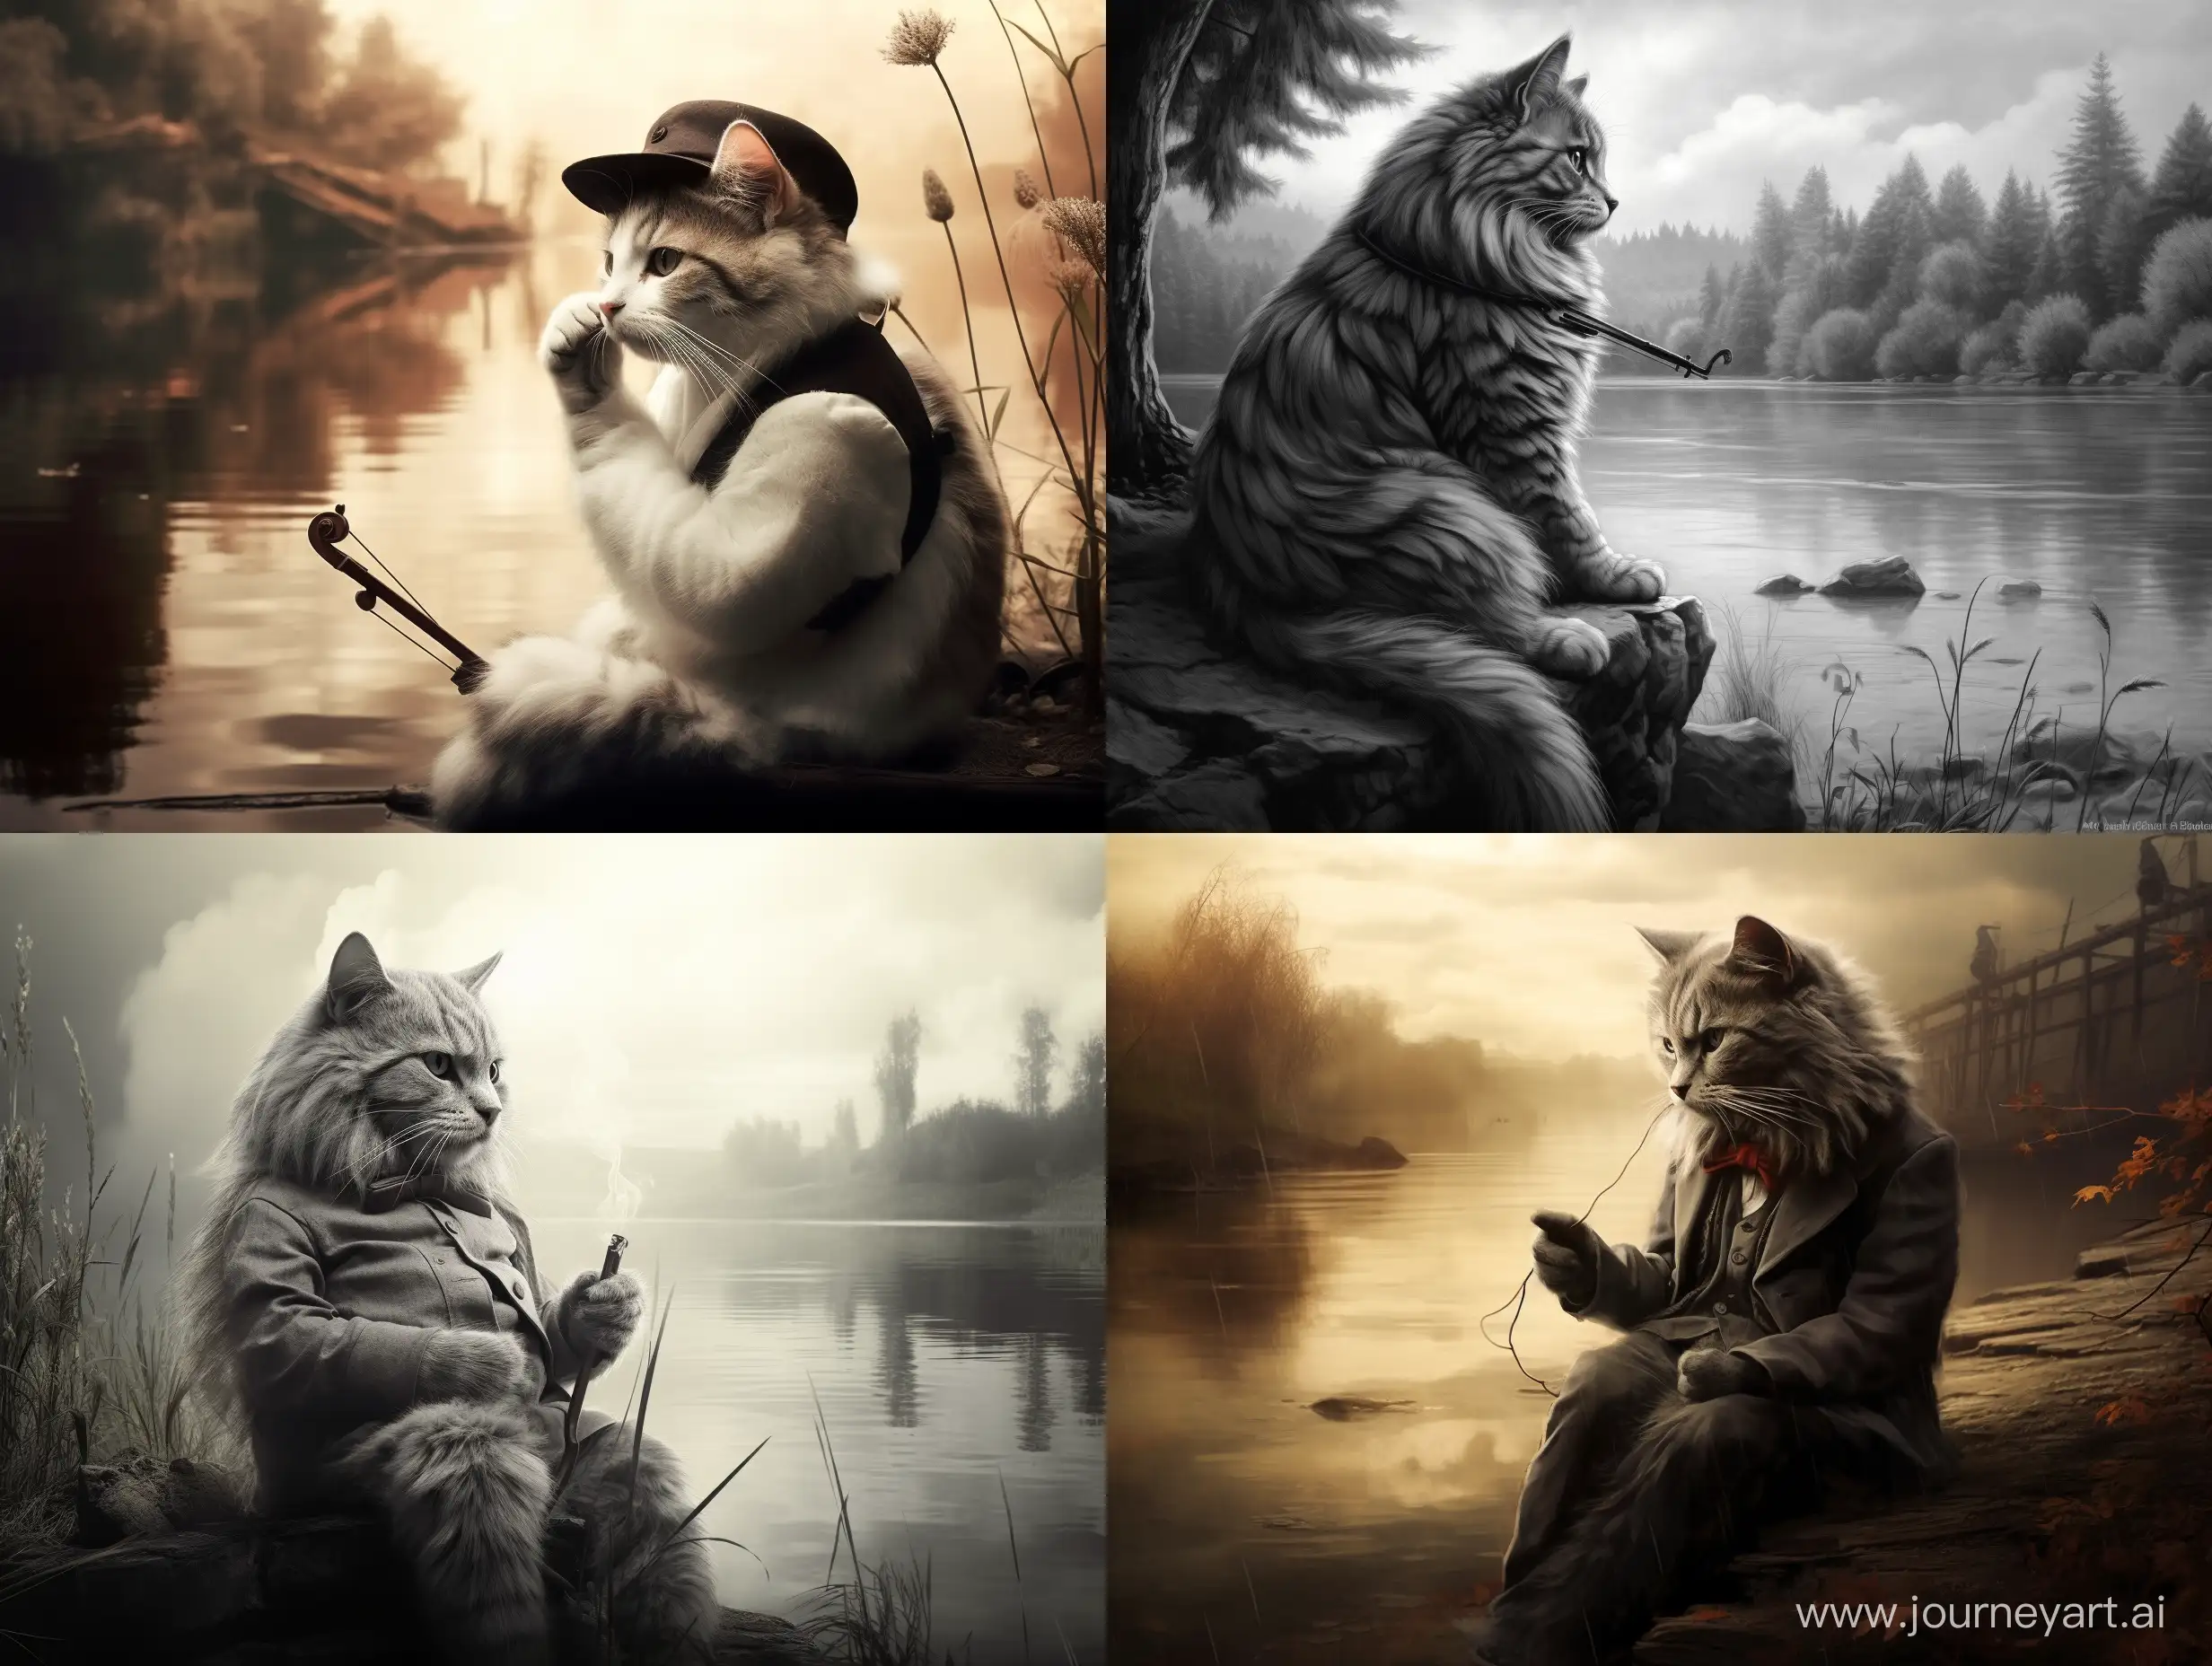 Give me a picture of a cat in black and white. The cat is sitting on the edge of the river, holding a cigar in his hand and contemplating the fish.